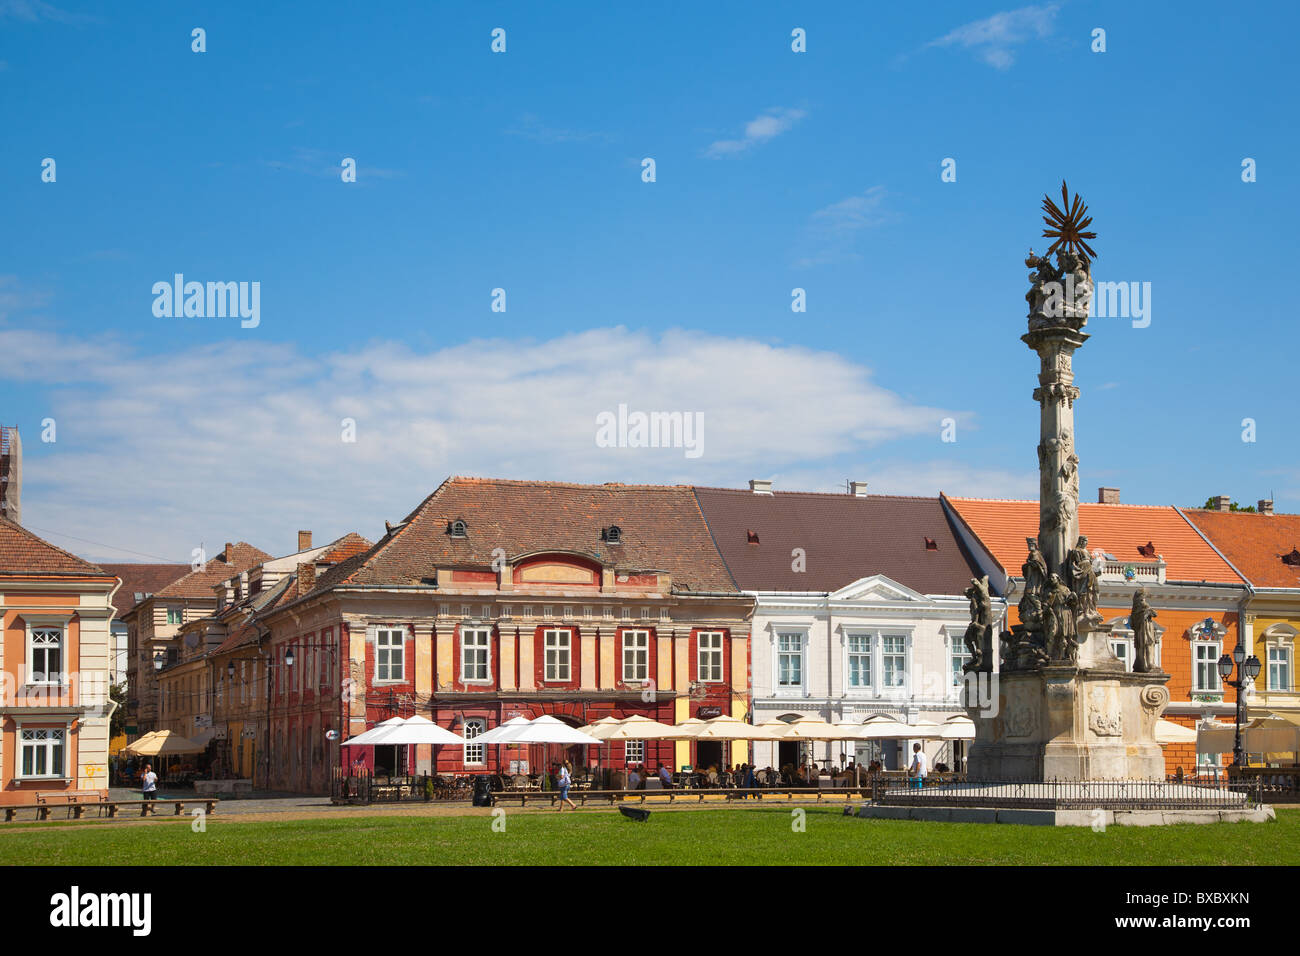 Unirii square in downtown Timisoara on August 19, 2010 in Romania. Stock Photo